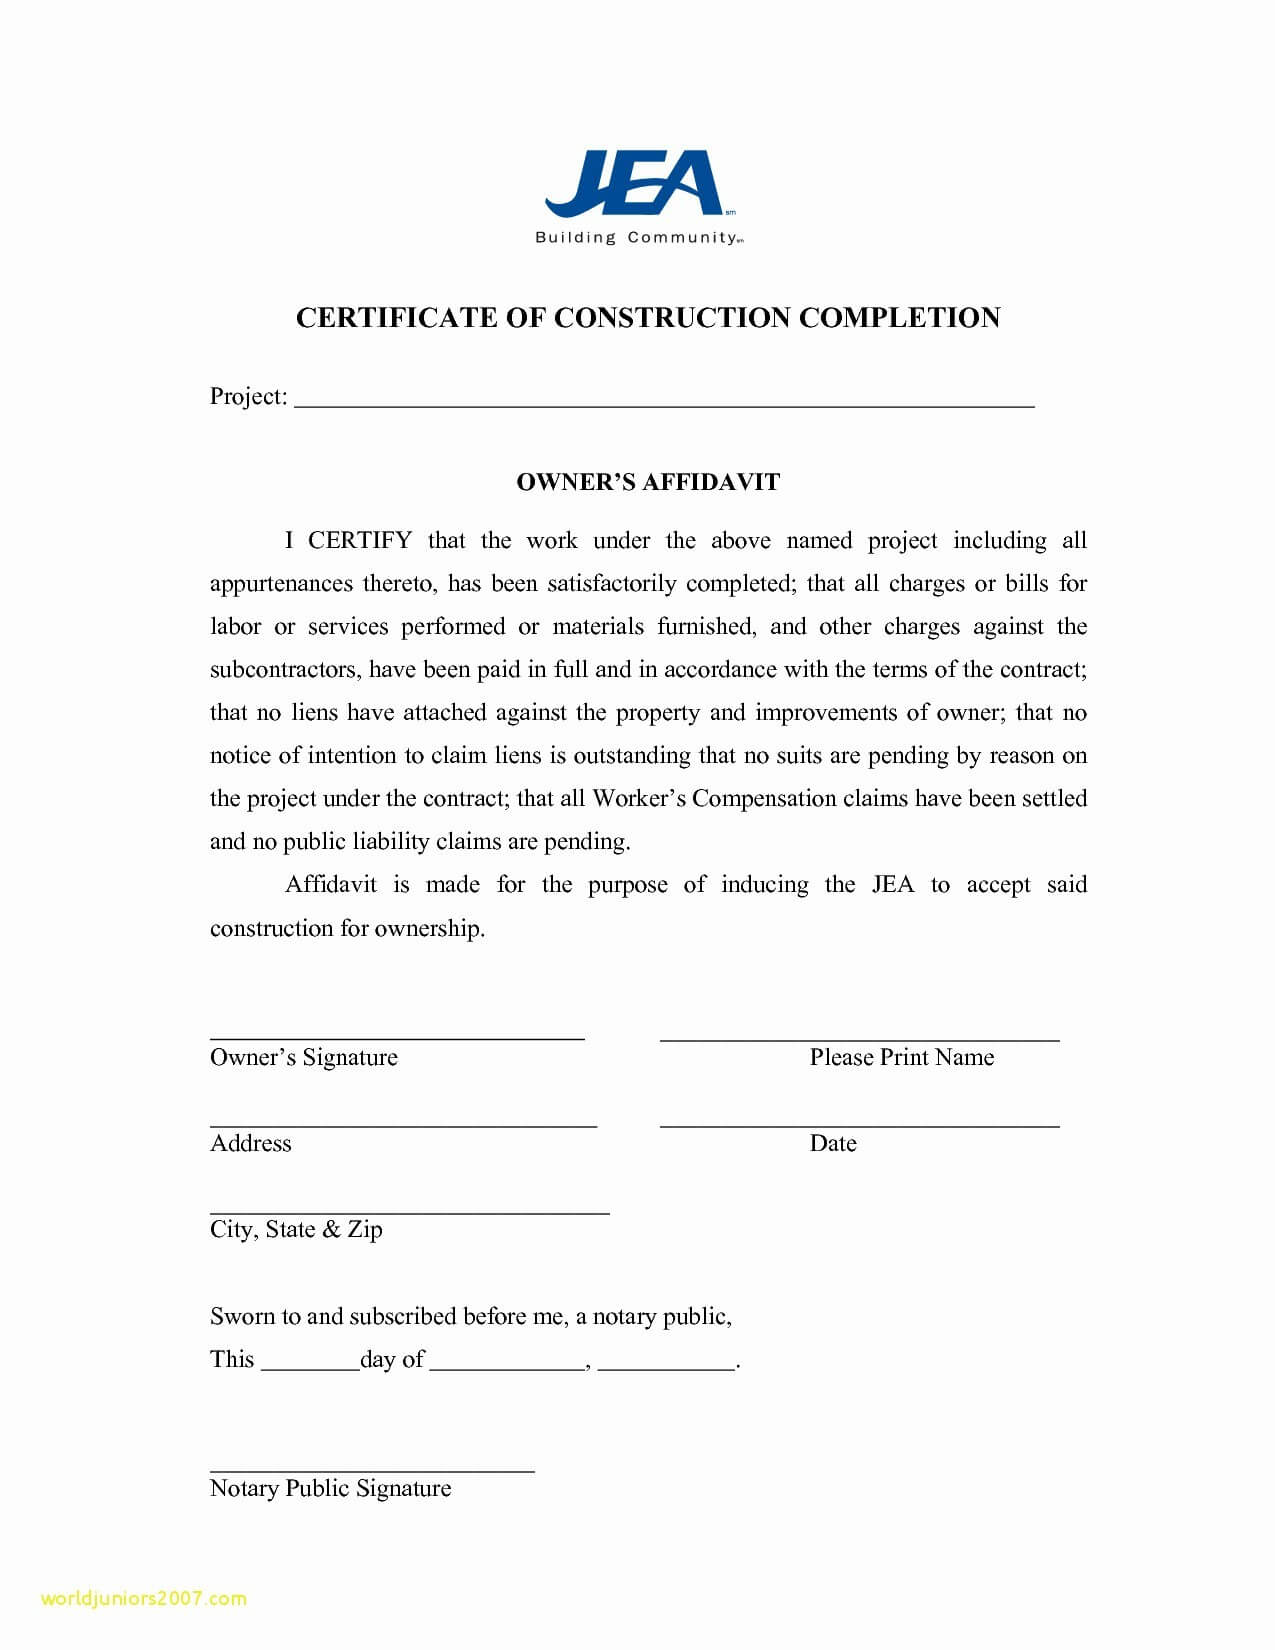 Letter Of Substantial Completion Template Examples | Letter Throughout Practical Completion Certificate Template Jct